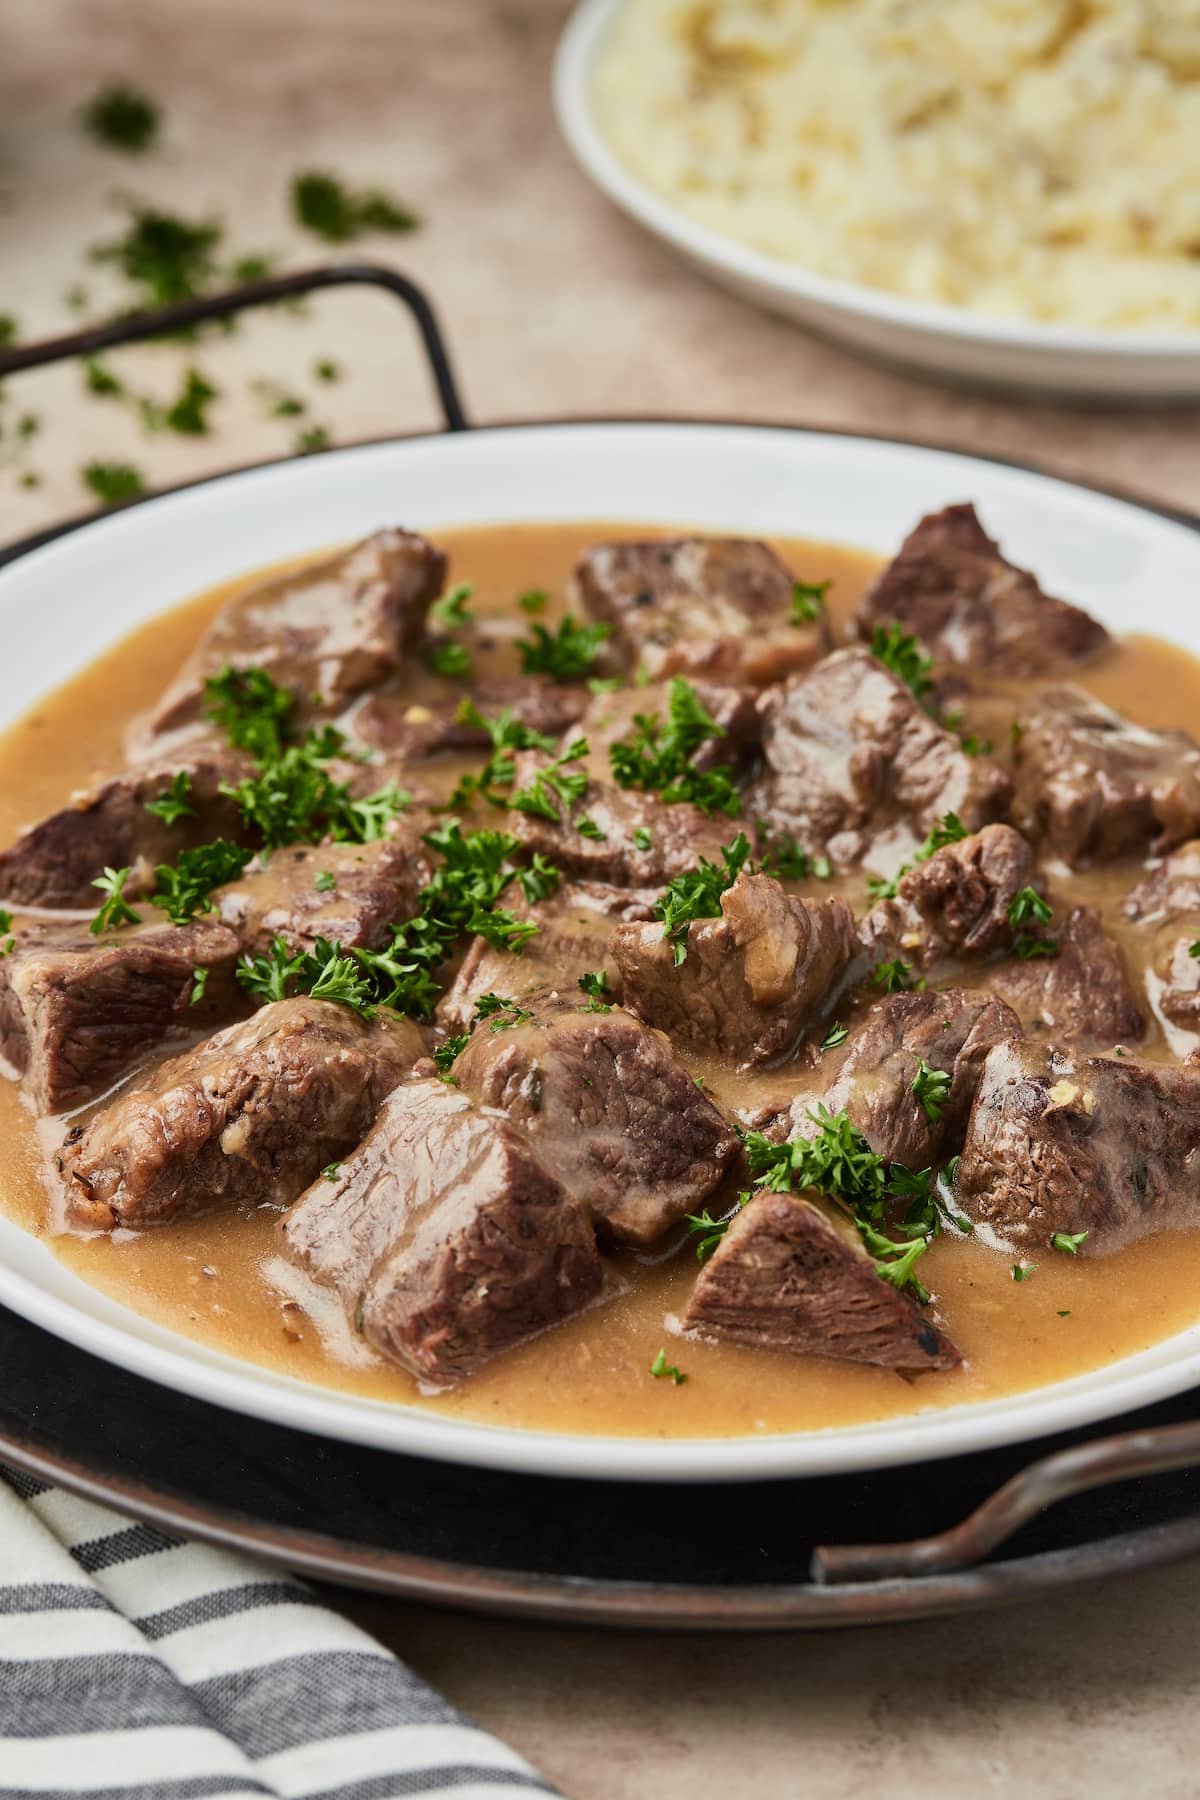 Cubed beef covered with gravy on a round serving dish garnished with green parsley.